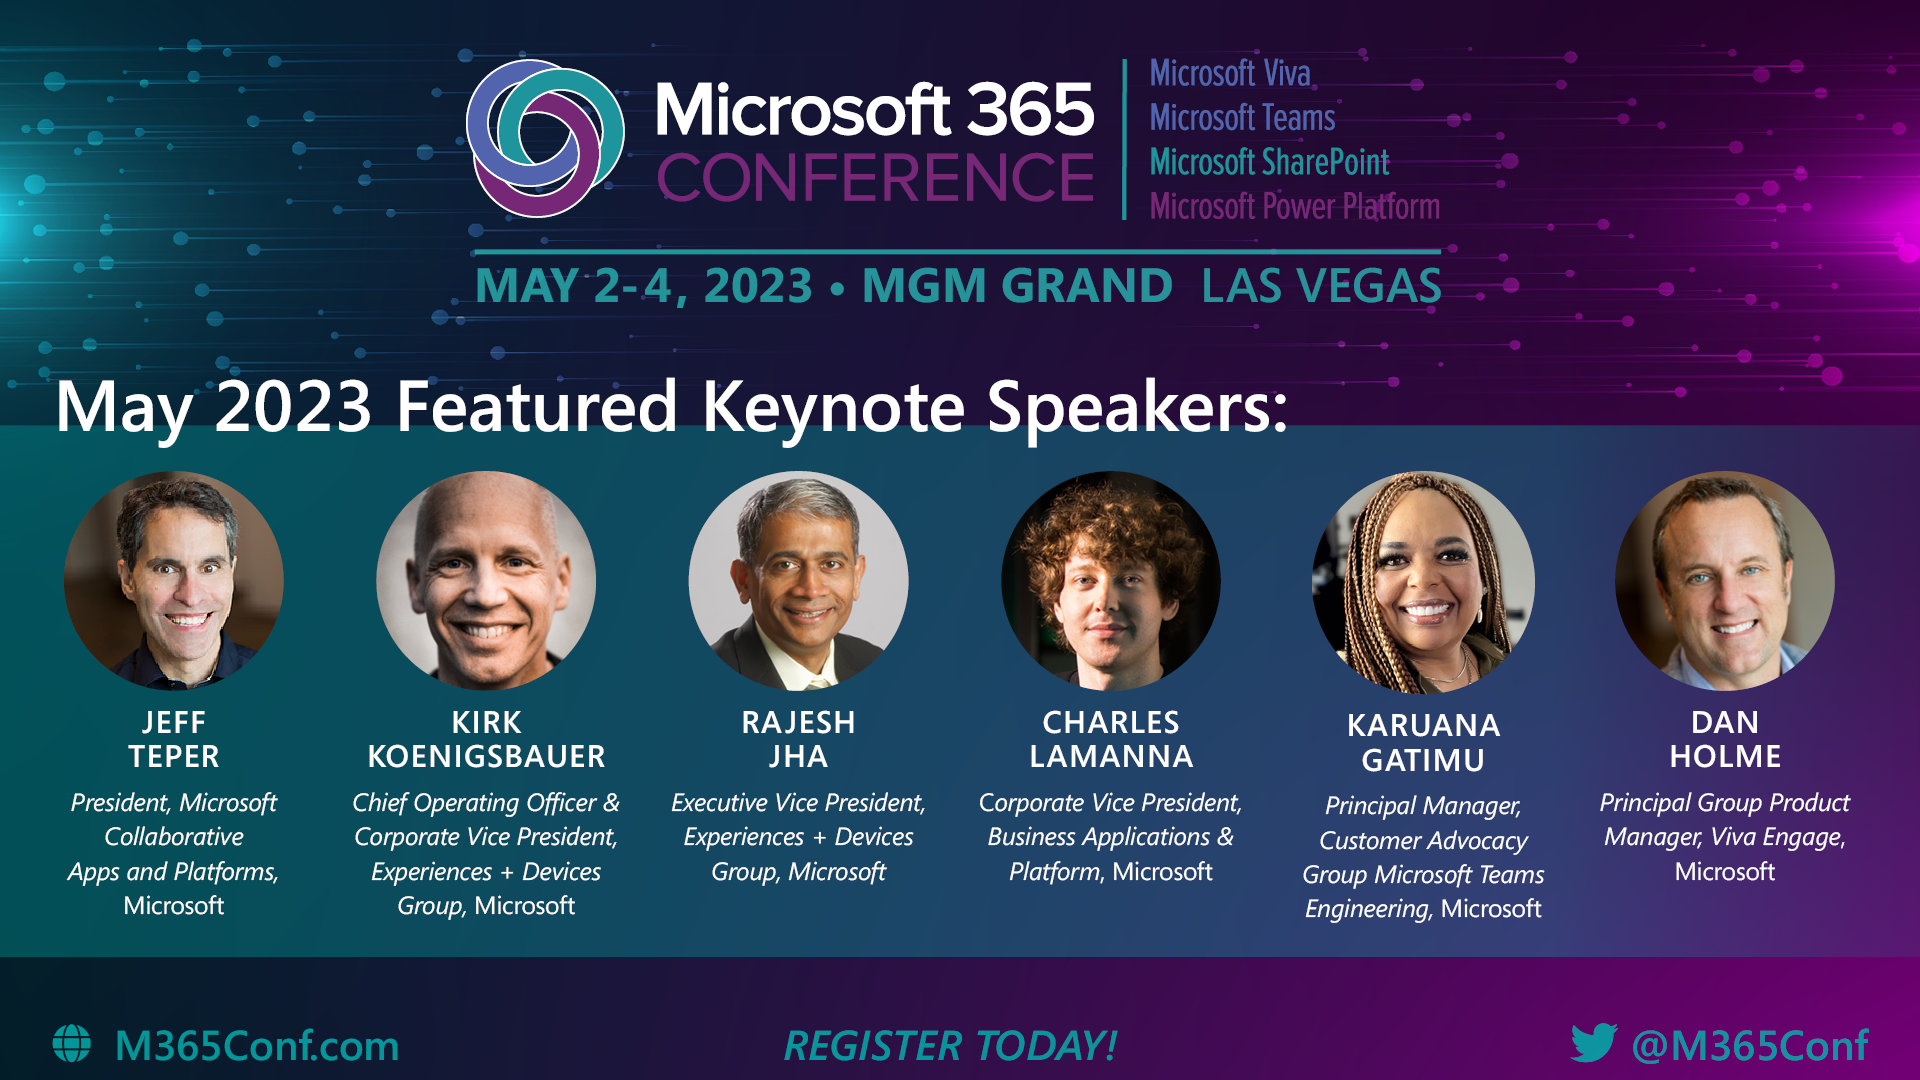 Microsoft 365 Conference event guide to keynotes, AMA, sessions, and more